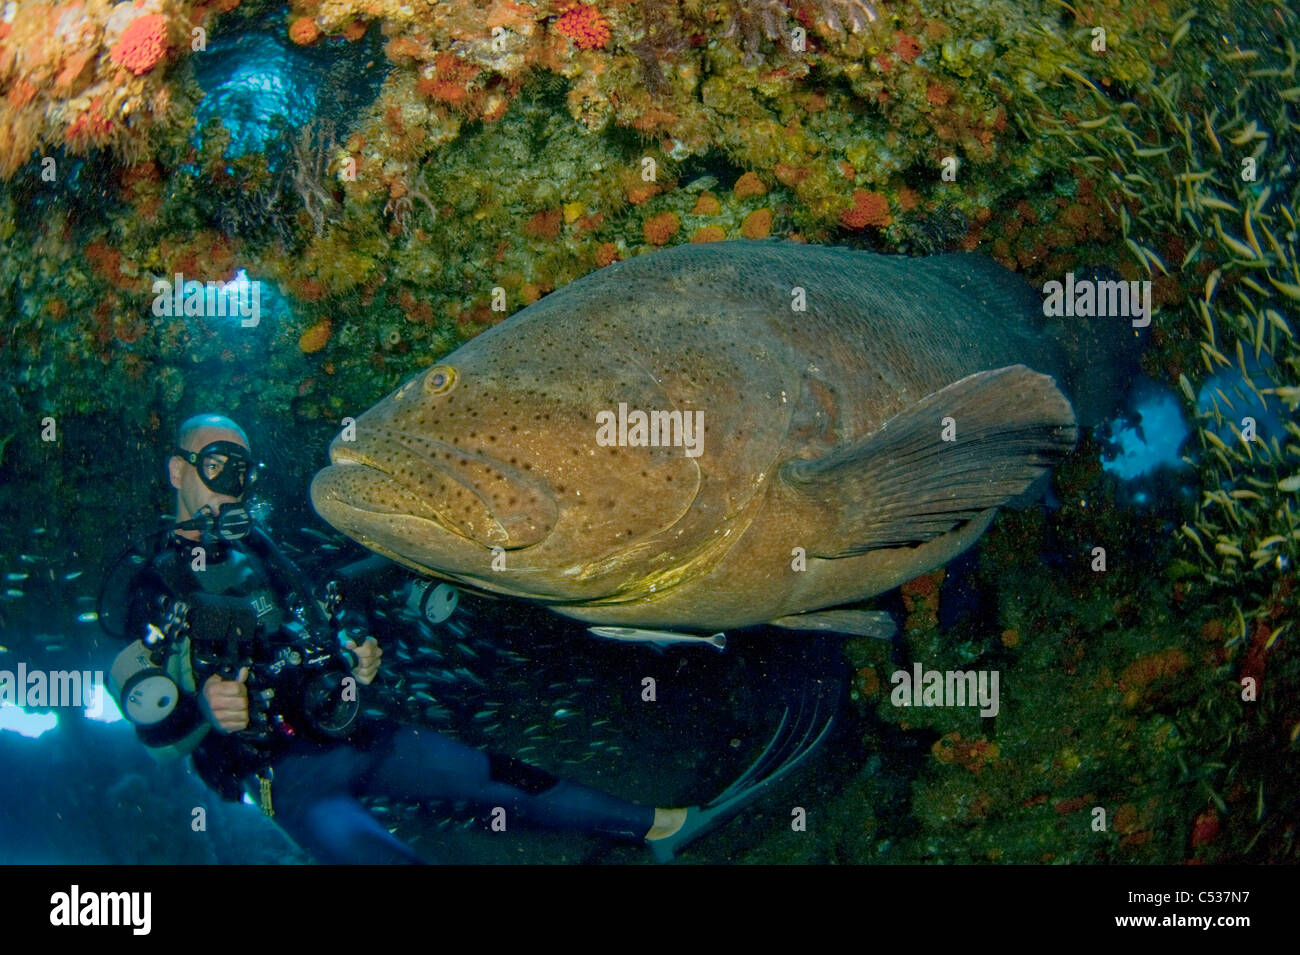 Scuba Diver and Goliath Grouper (Epinephelus itajara) in Palm Beach; FL. Protected and endangered Stock Photo